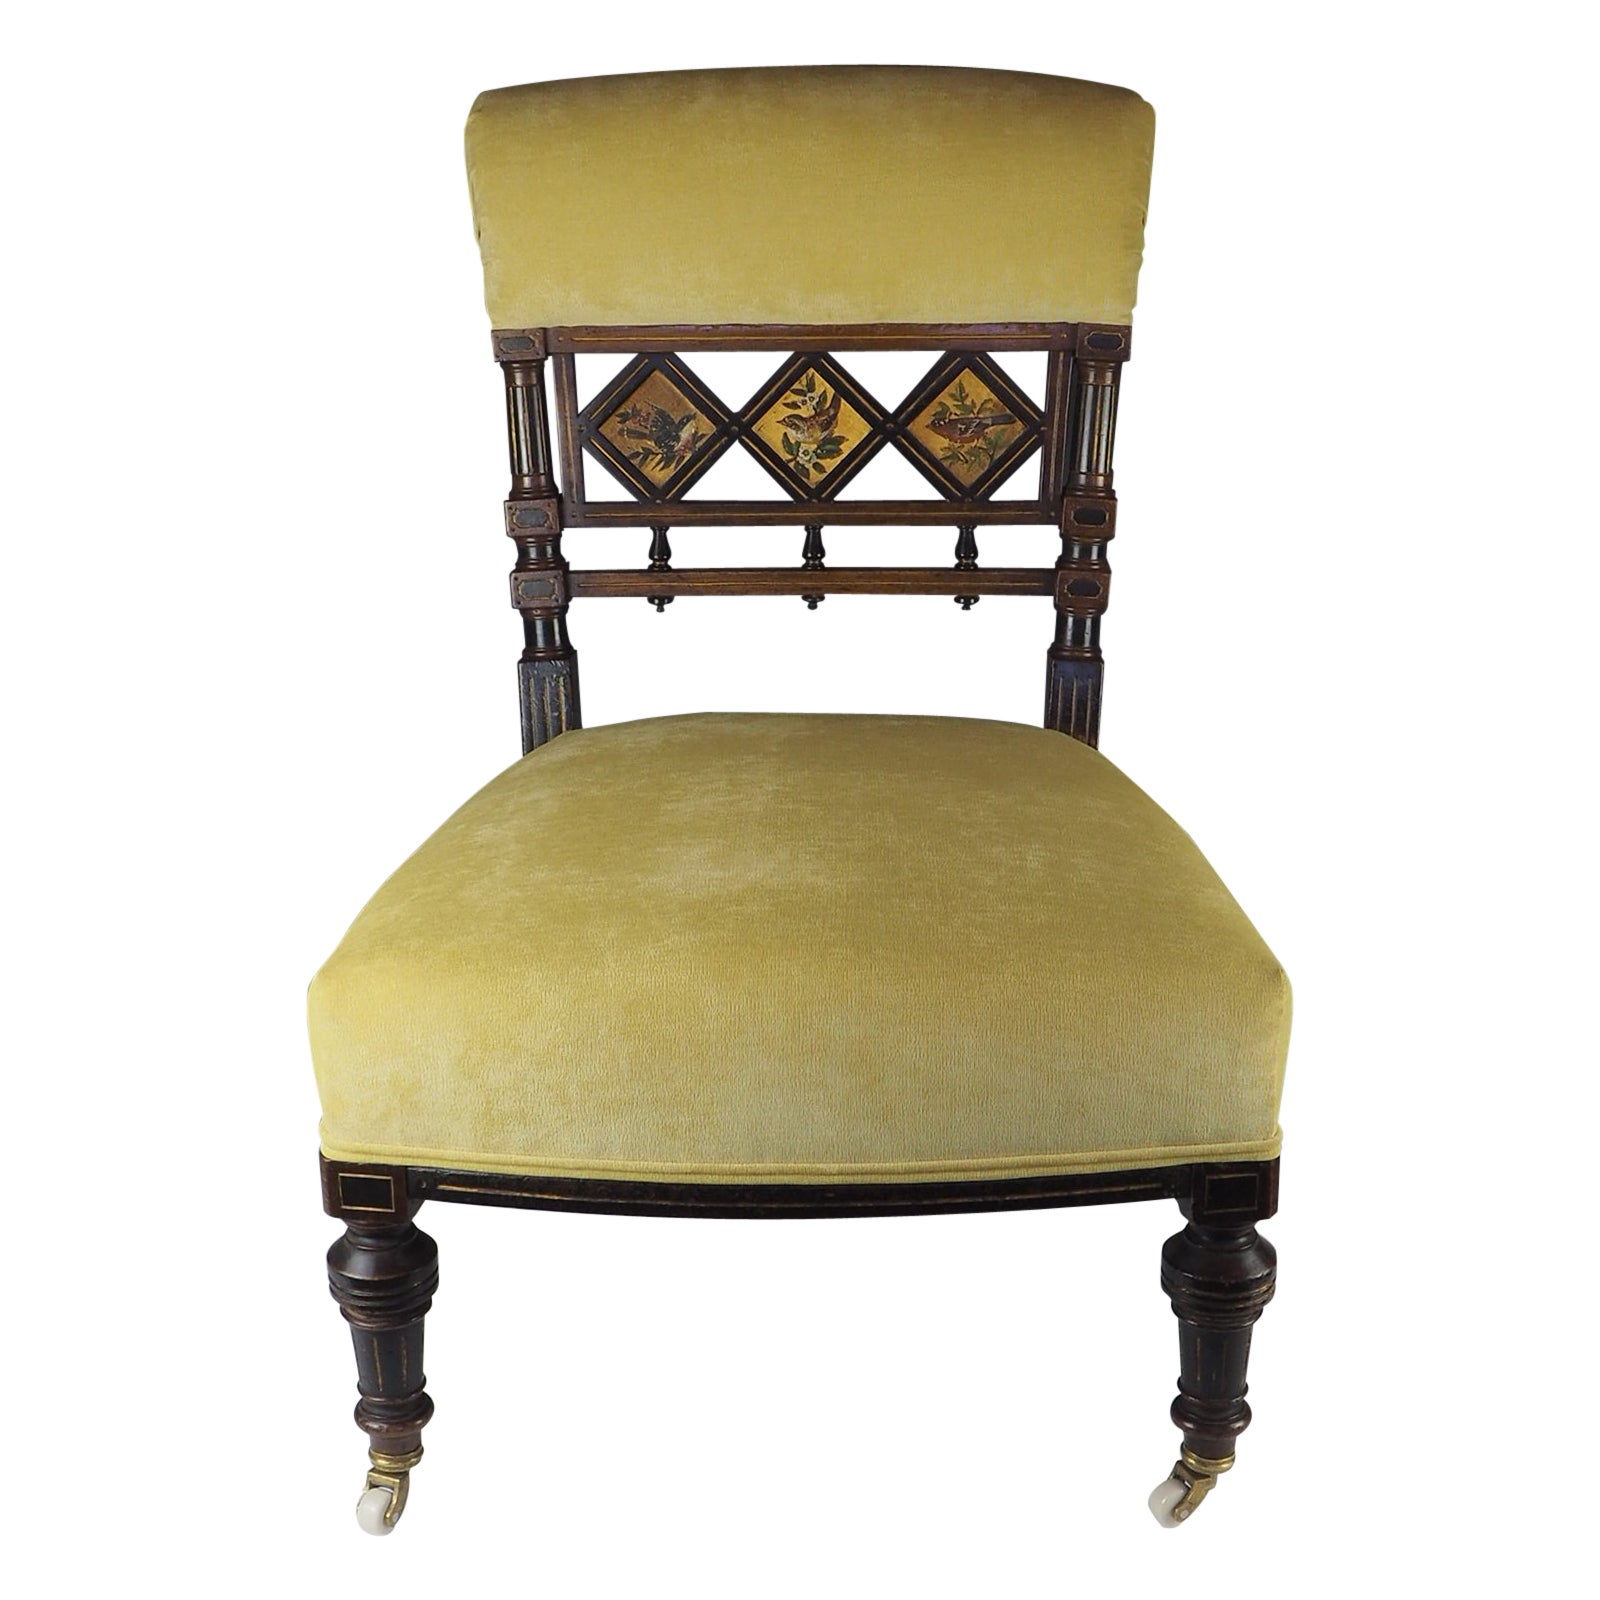 Aesthetic Movement Ebonised and Gilt Side Chair with Hand Painted Birds, c. 1870 For Sale